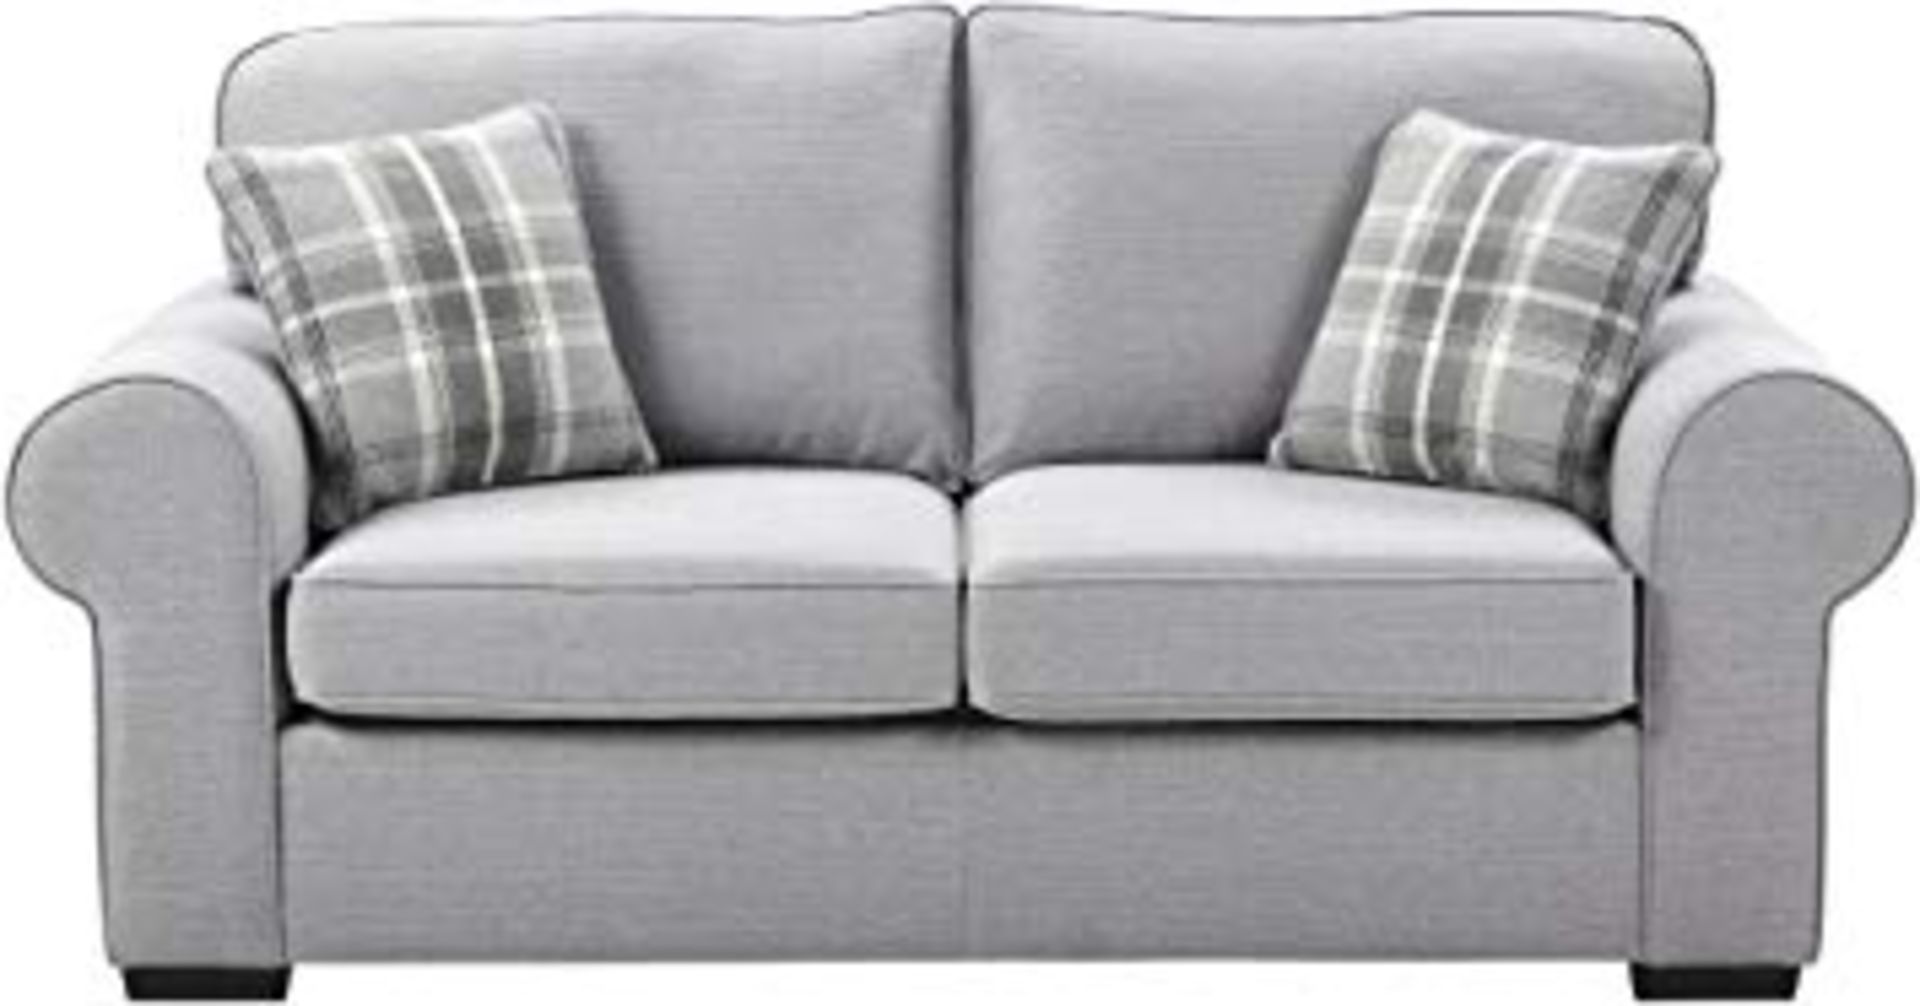 1 BRAND NEW BAGGED EARLEY 2 SEATER SOFA IN LIGHT GREY / CTS07888 (VIEWING HIGHLY RECOMMENDED)